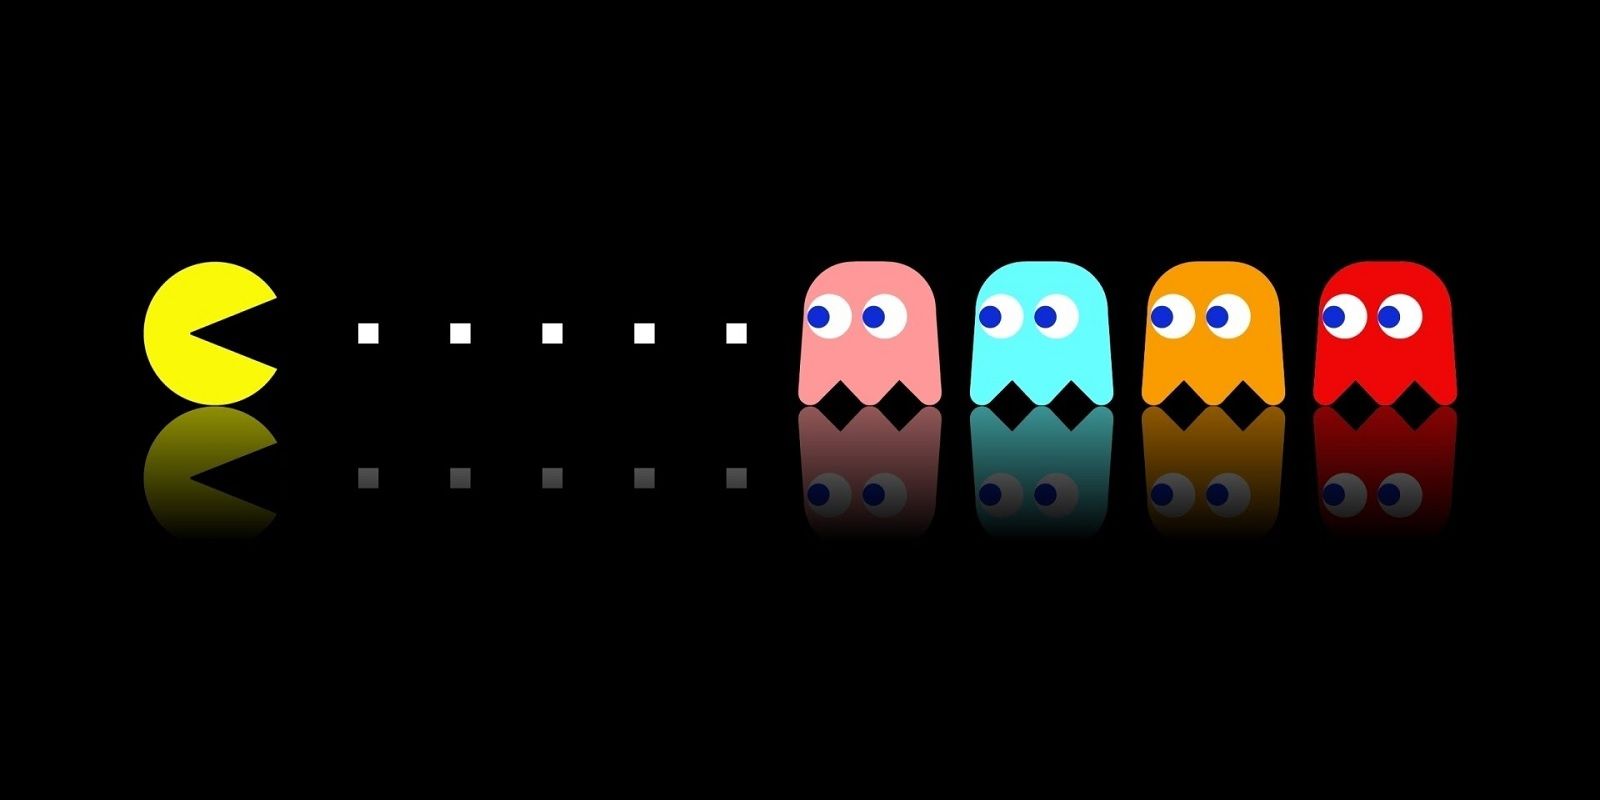 Pacman faces off against the four ghosts in Pac-Man.